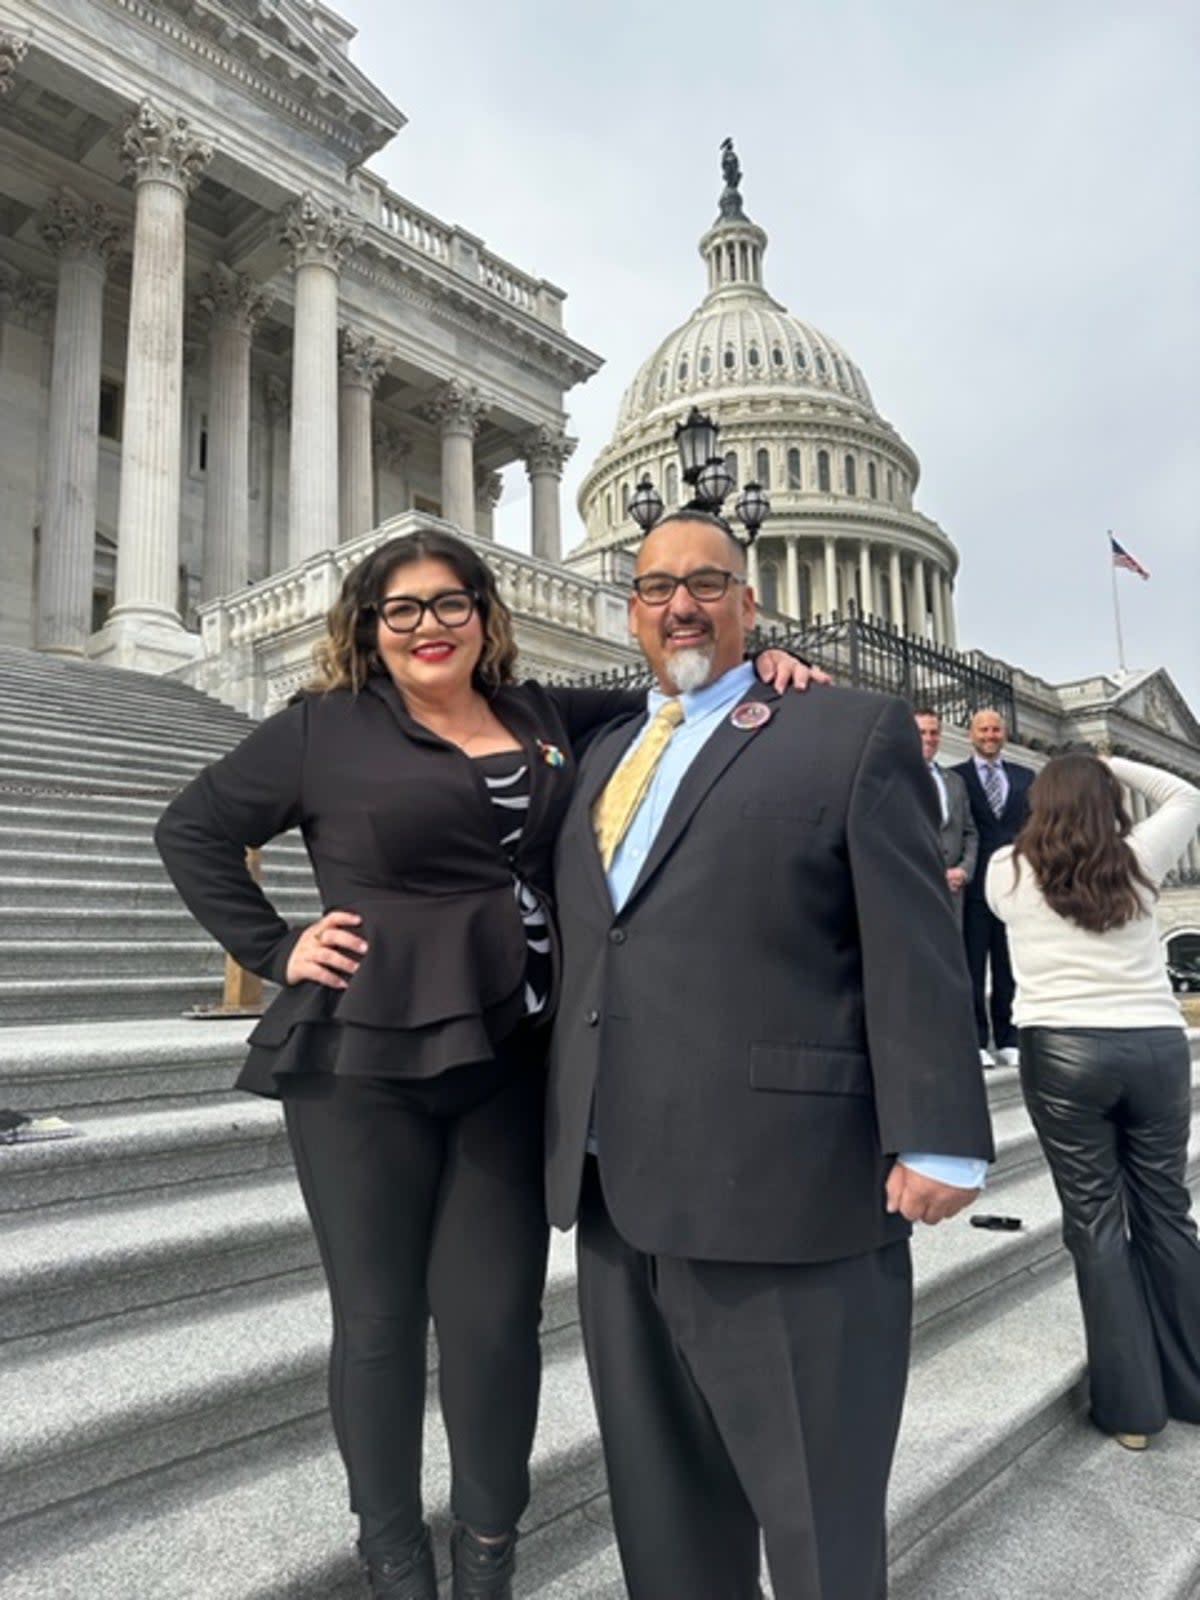 Richard Fierro, of Colorado Springs, poses with his wife in Washington DC, where he was attending the State of the Union after subduing the gunman during November’s Club Q attack in his hometown (Richard Fierro)